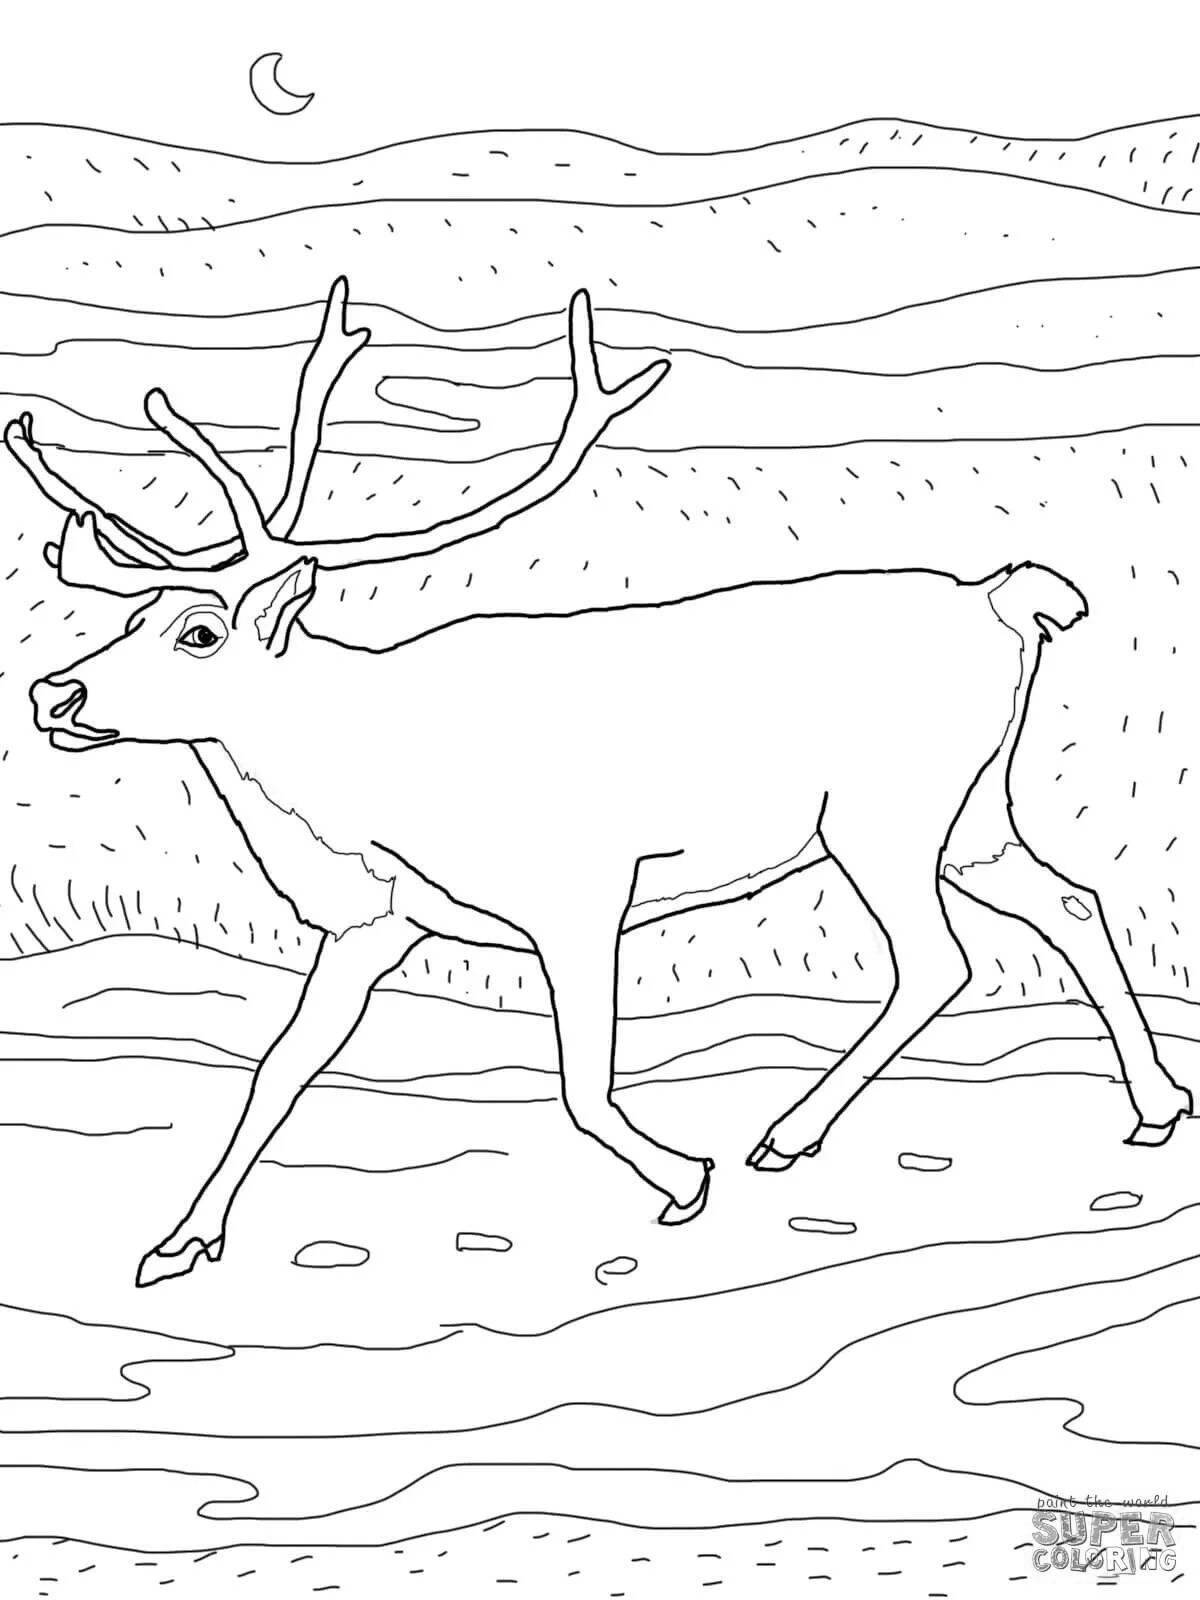 Northern animals funny coloring book for kindergarten